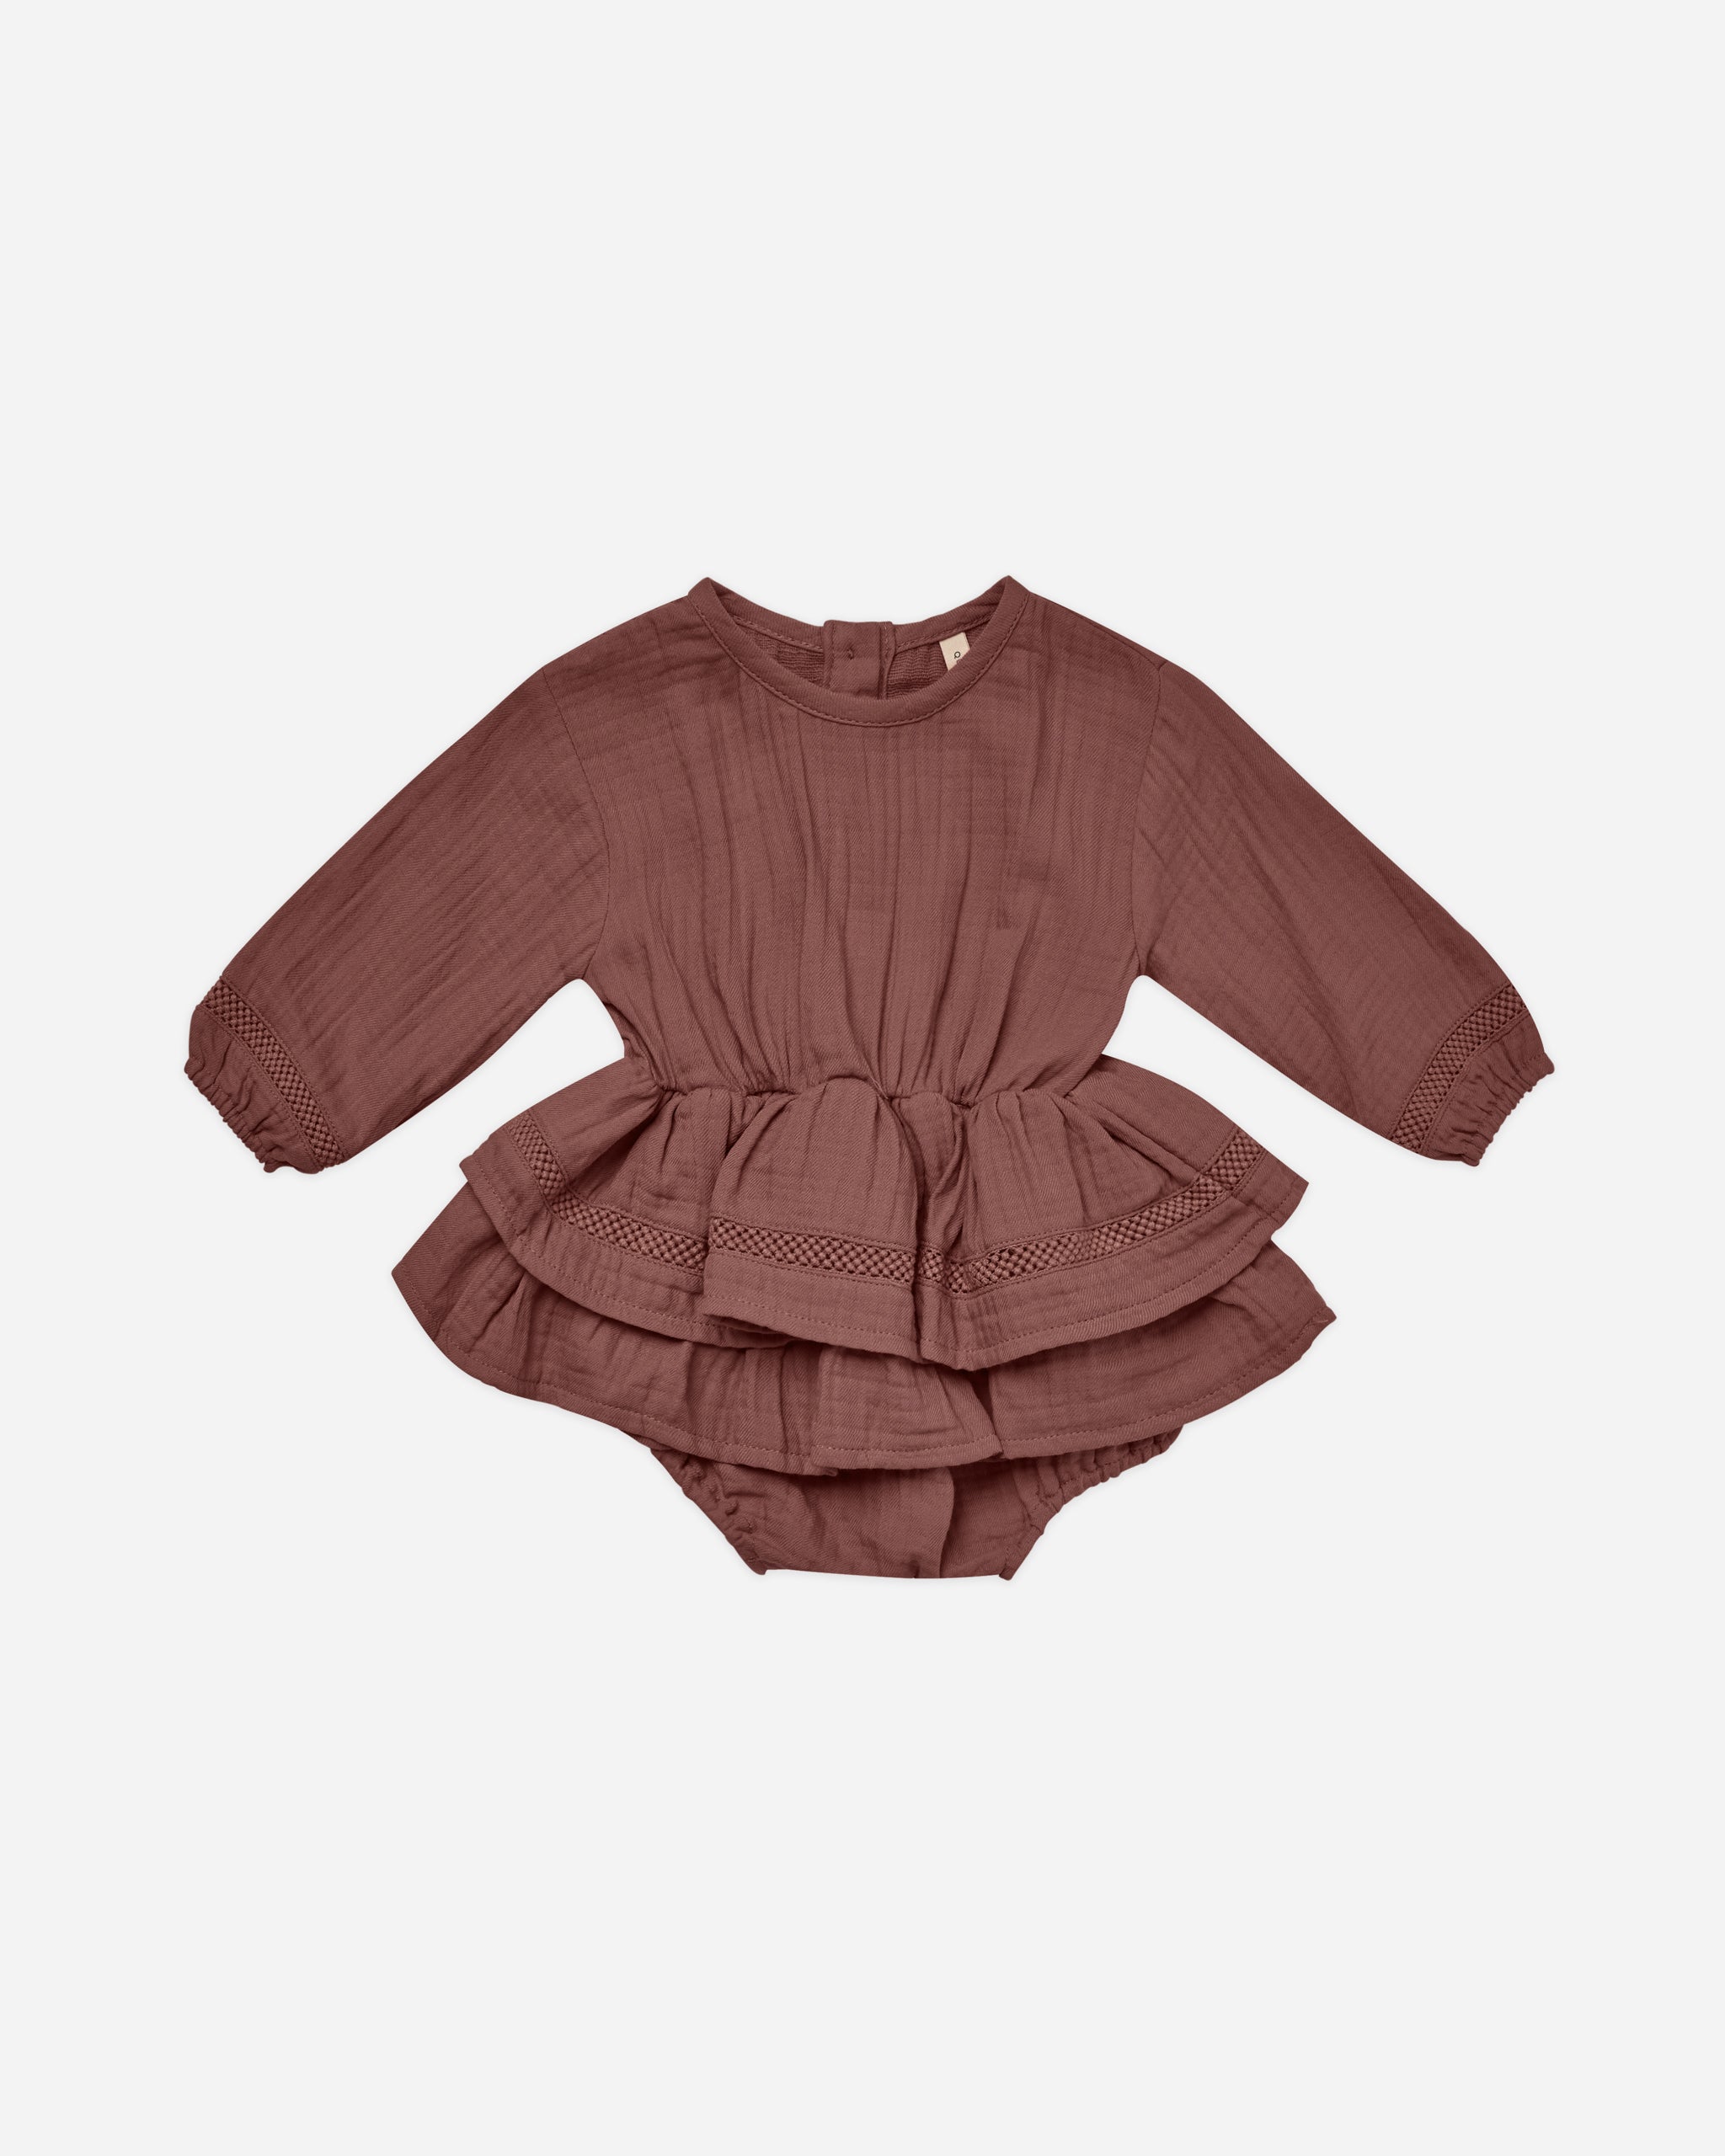 Rosie Romper || Plum - Rylee + Cru | Kids Clothes | Trendy Baby Clothes | Modern Infant Outfits |